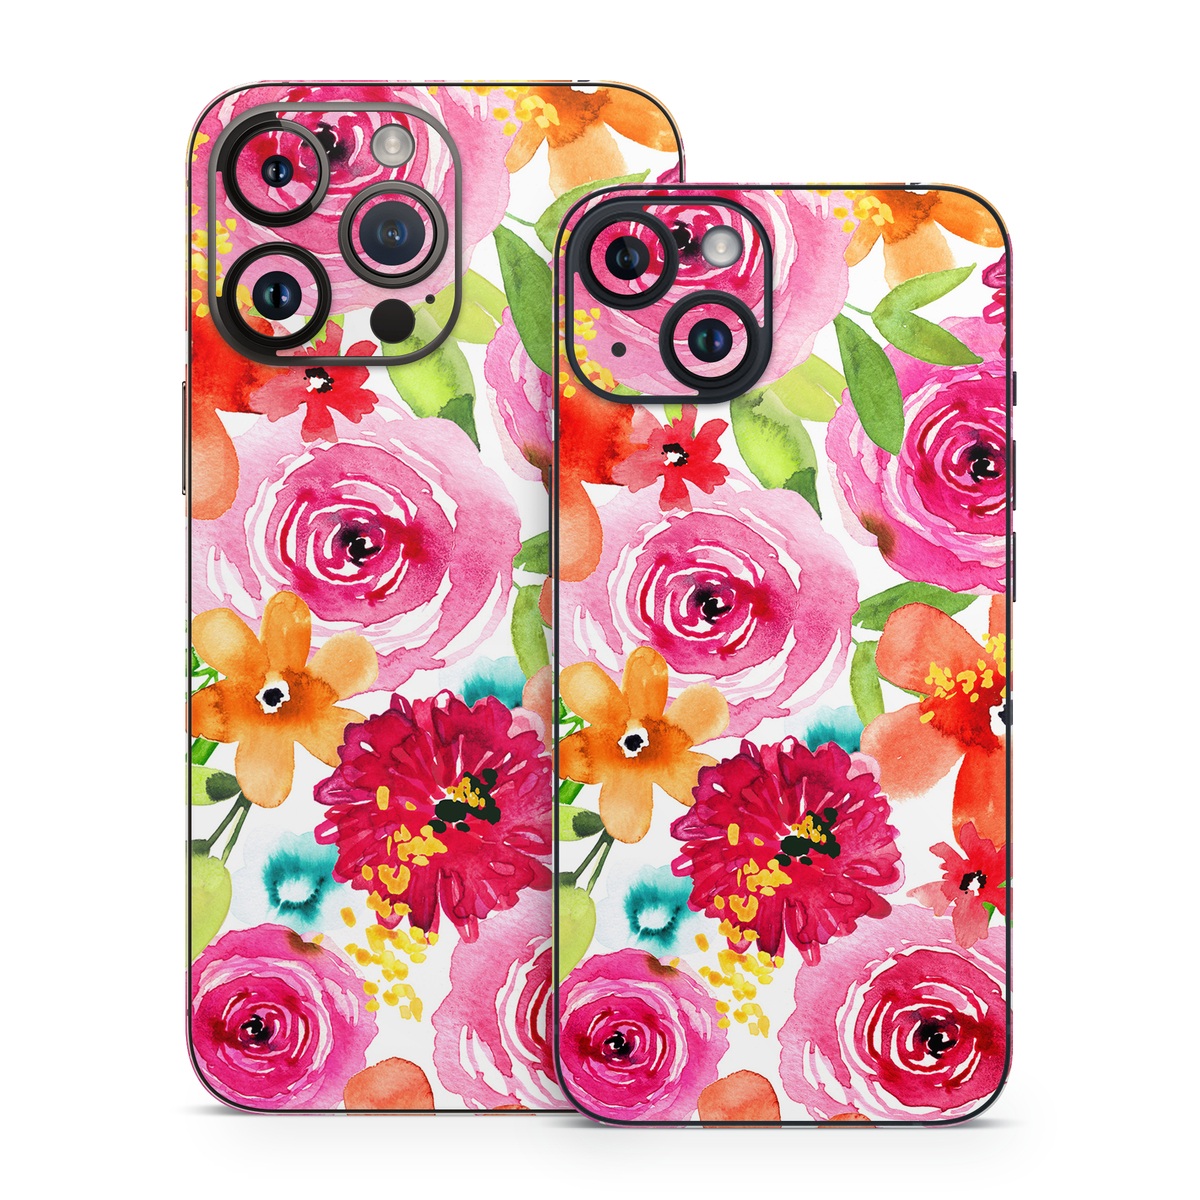 iPhone 14 Skin design of Flower, Cut flowers, Floral design, Plant, Pink, Bouquet, Petal, Flower Arranging, Artificial flower, Clip art, with pink, red, green, orange, yellow, blue, white colors